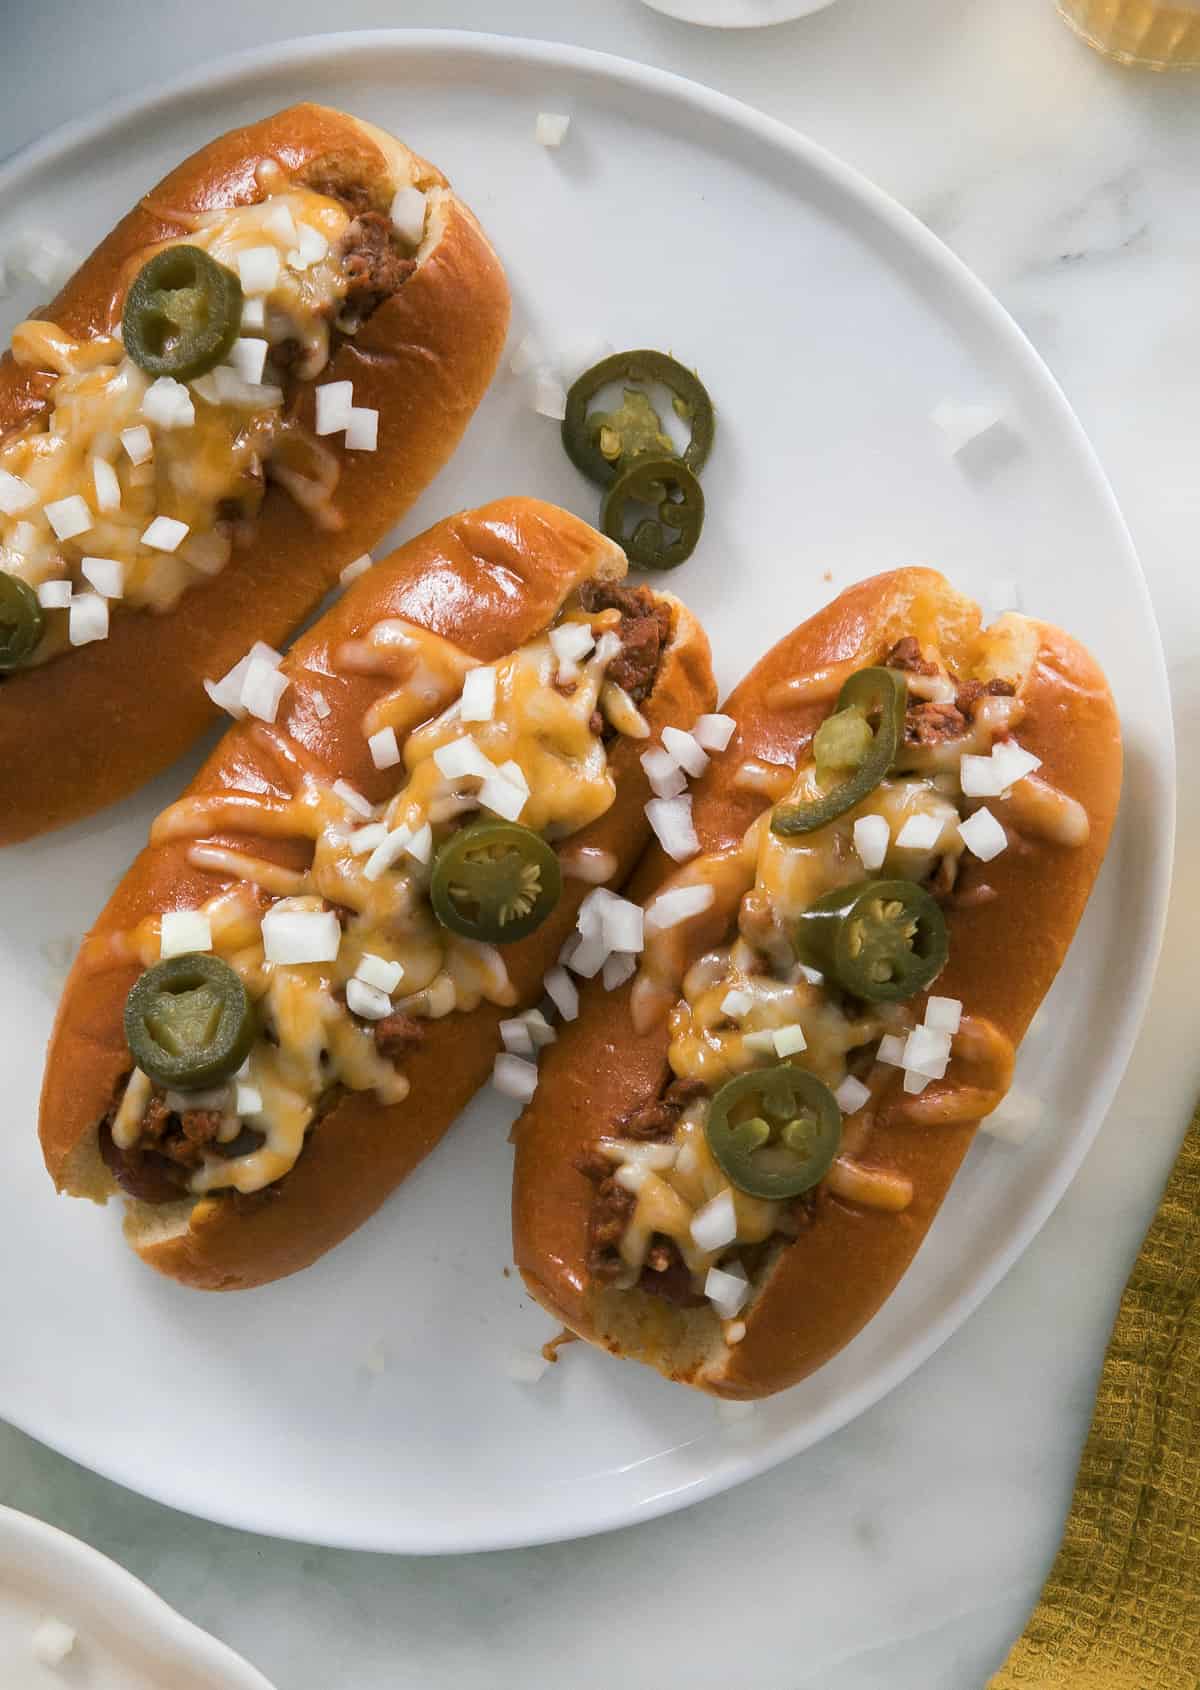 All melty chili cheese dogs with jalapeño and onion on top. 